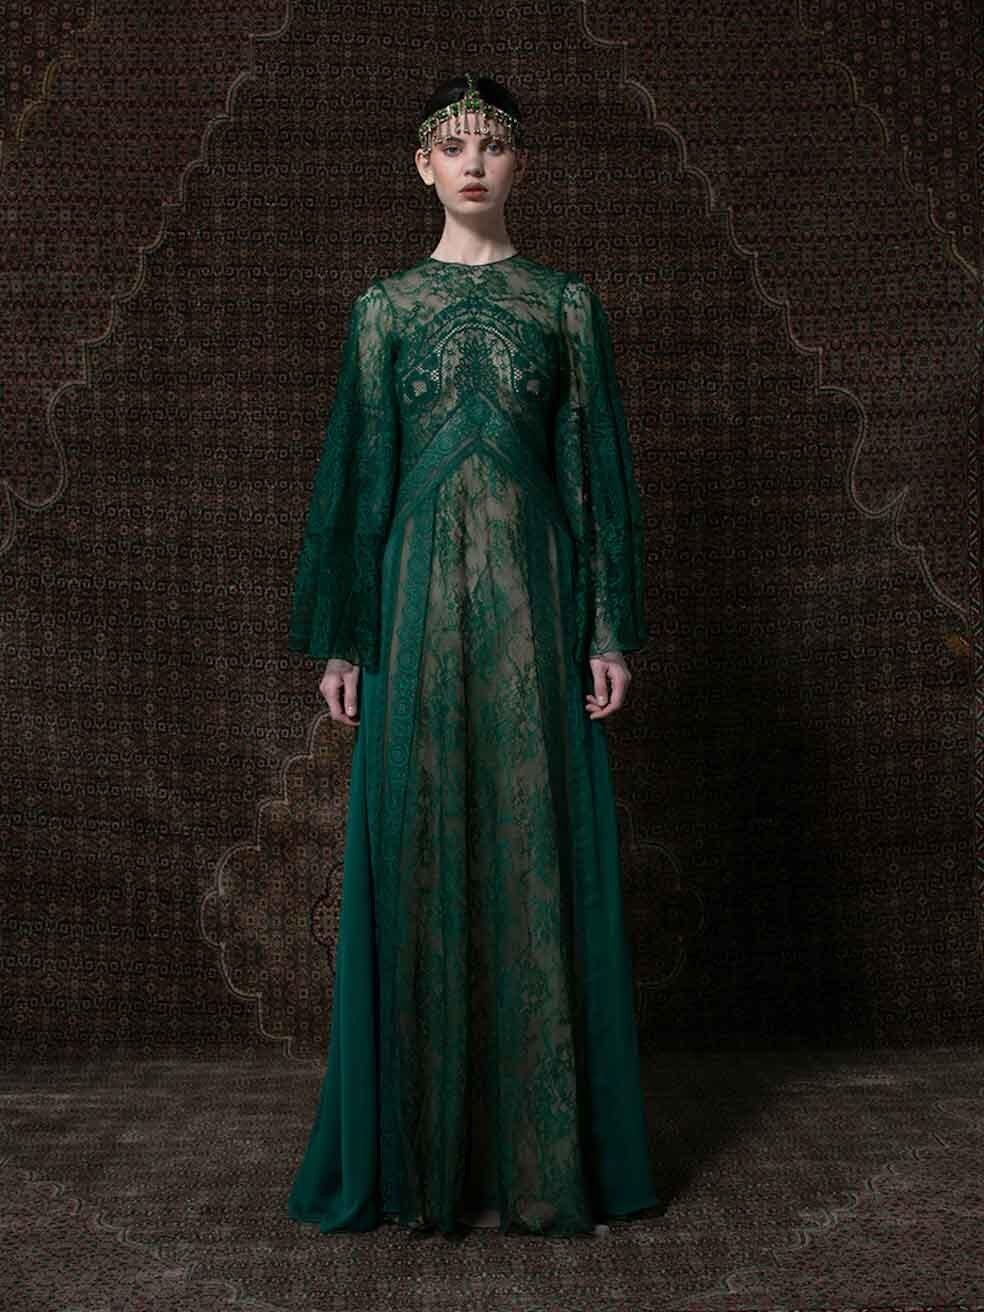 CONDITION is Never Worn With Tag. Minimal wear to dress is evident. Minimal wear to the front with small plucks to the lace on this used Honayda designer resale item.
 
 
 
 Details
 
 
 A/W 22
 
 Green
 
 Lace
 
 Maxi gown
 
 Round neckline
 
 Lace